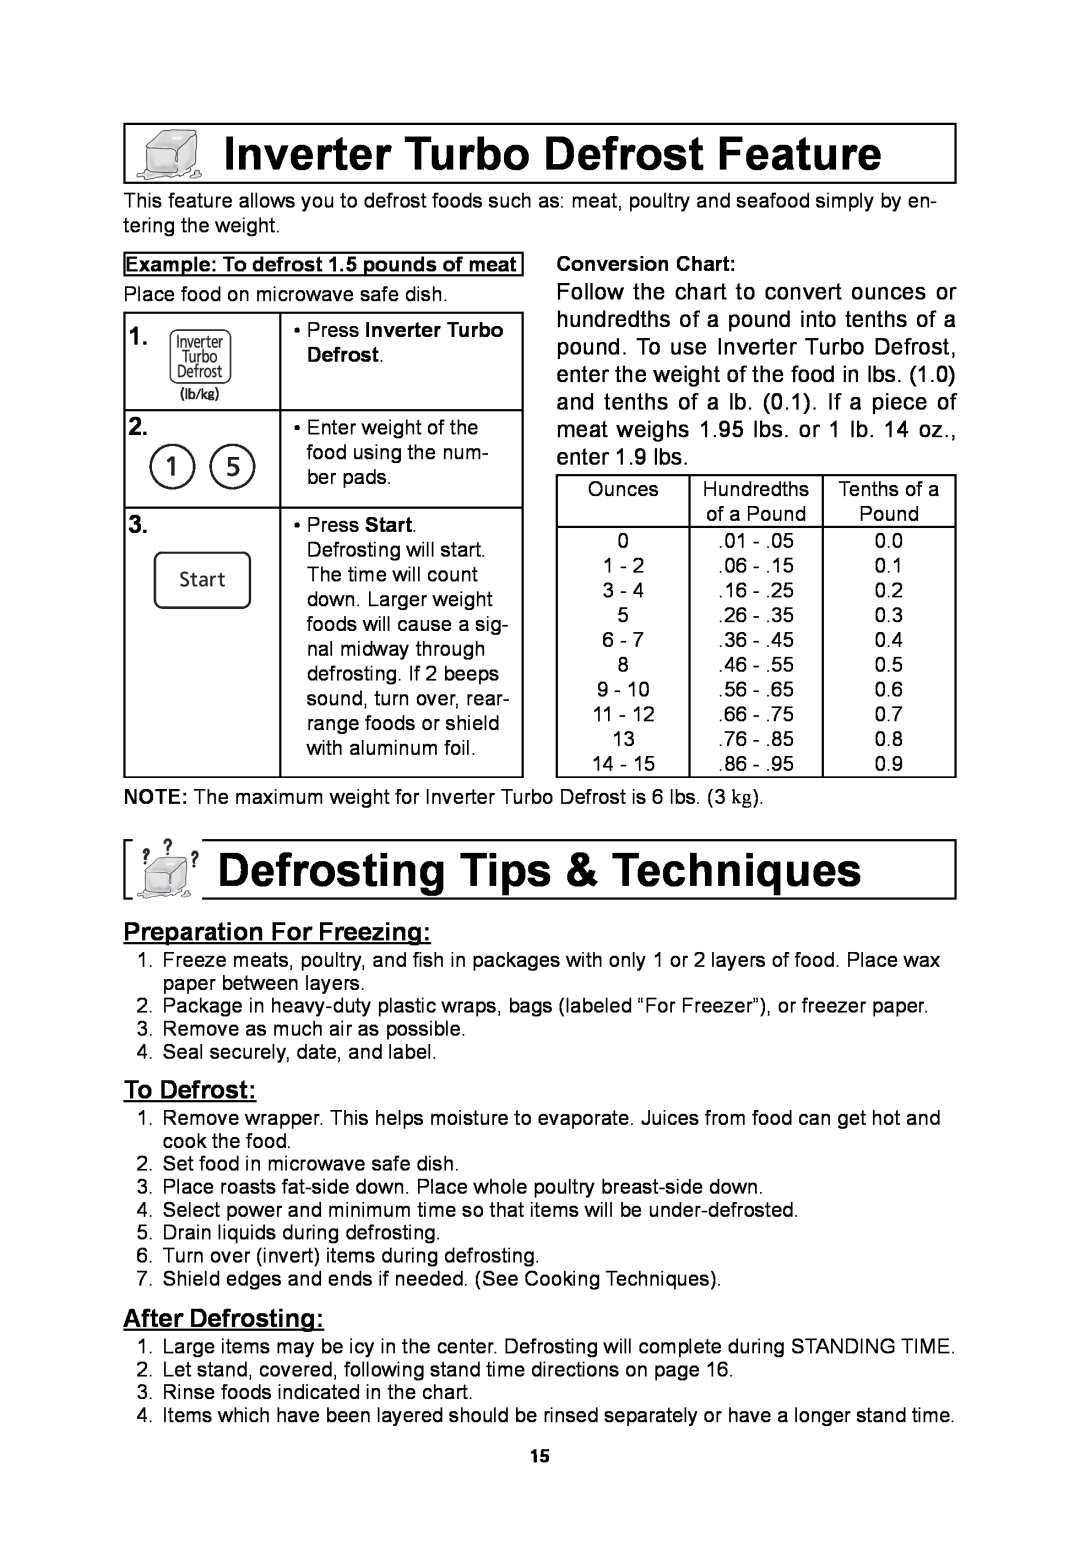 Panasonic NNSN973S Inverter Turbo Defrost Feature, Defrosting Tips & Techniques, Preparation For Freezing, To Defrost 